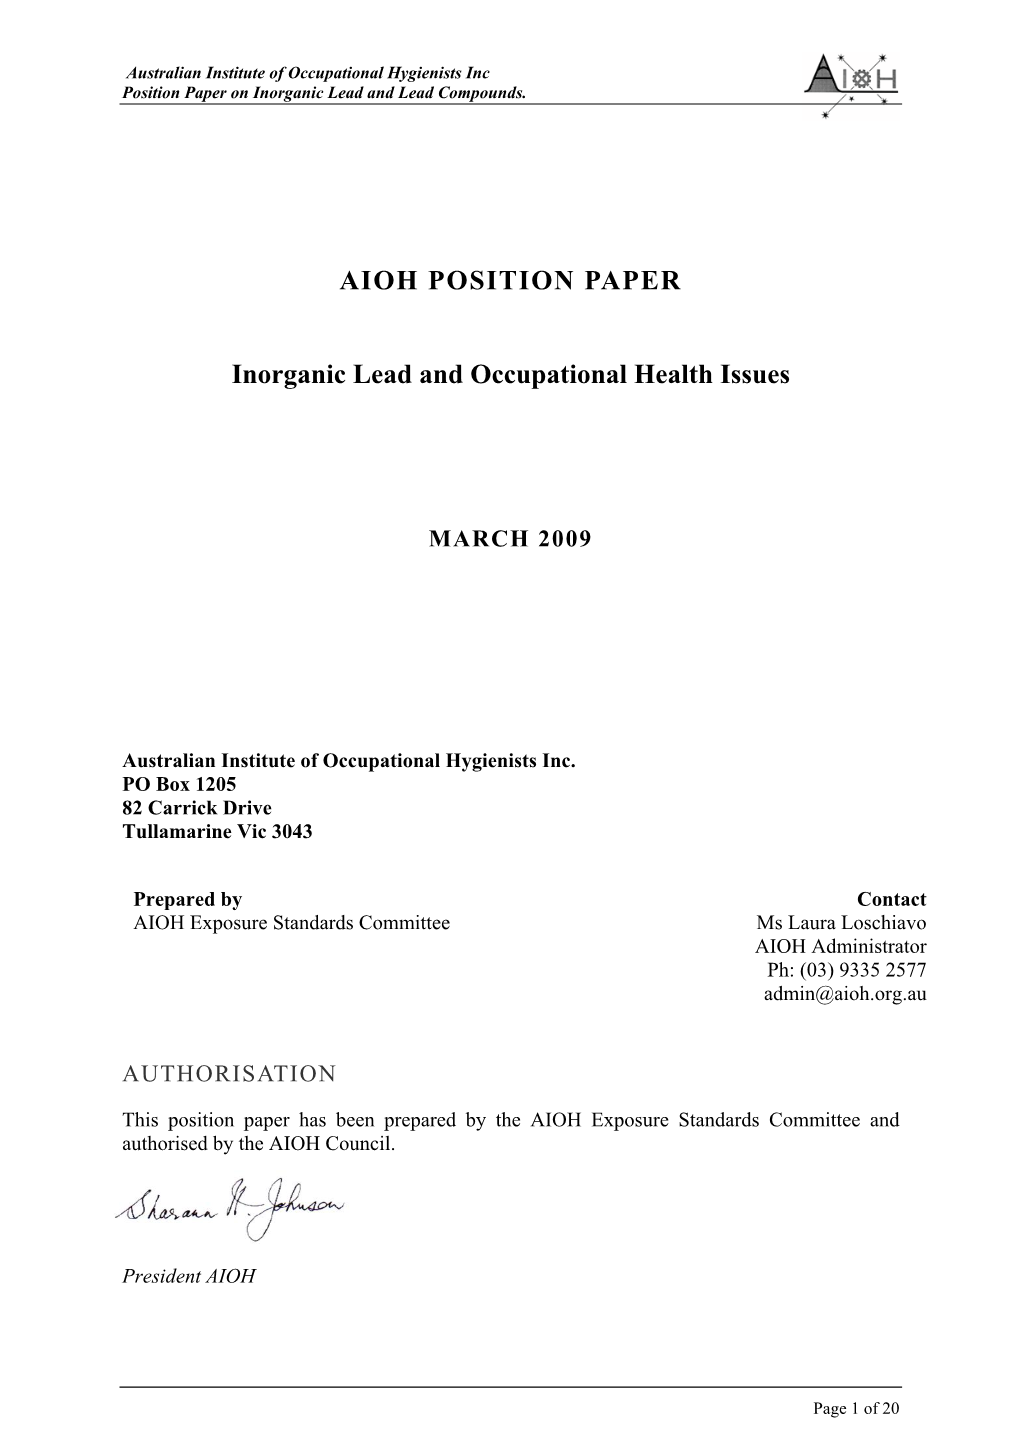 AIOH POSITION PAPER Inorganic Lead and Occupational Health Issues